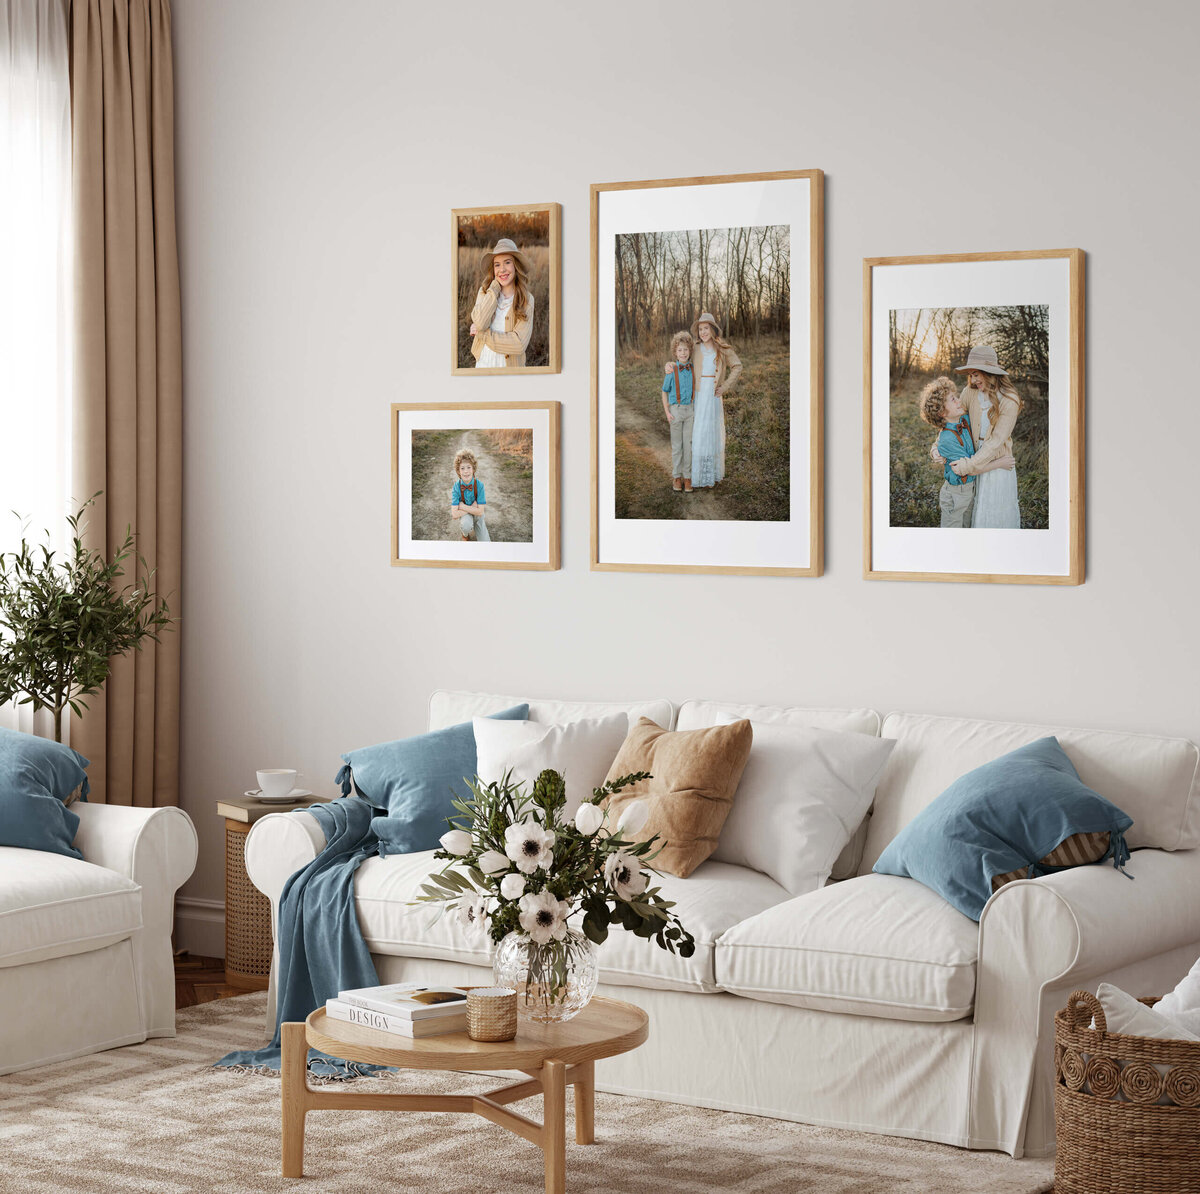 interior image of a living room with framed wall art on the walls